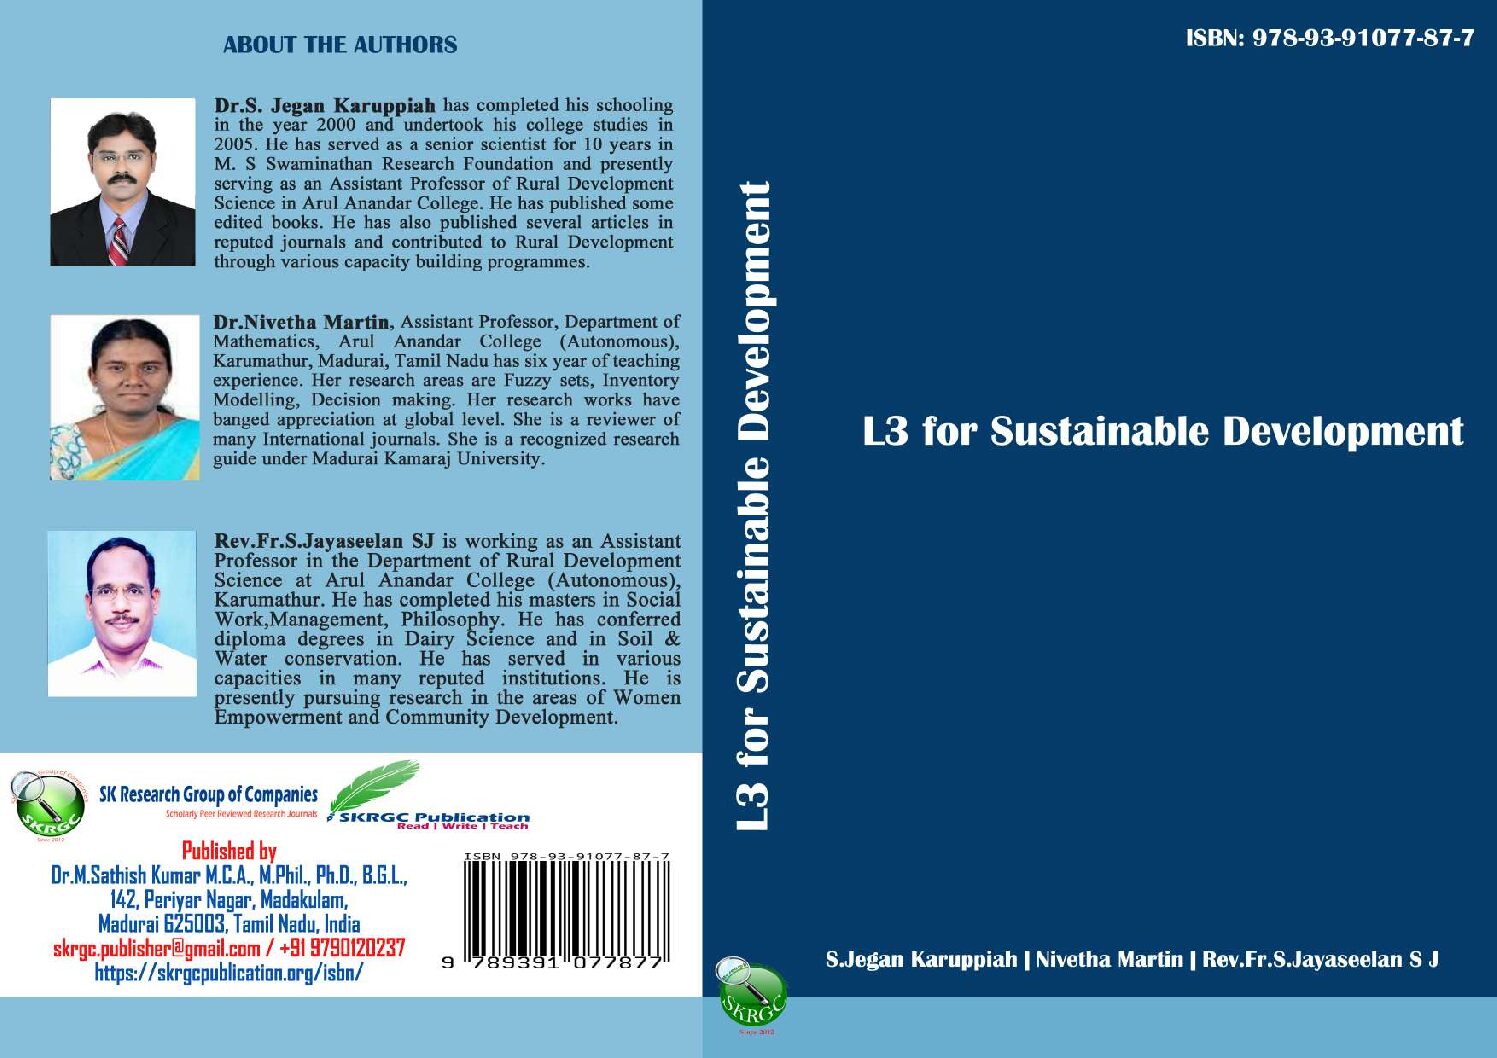 L3 for Sustainable Development